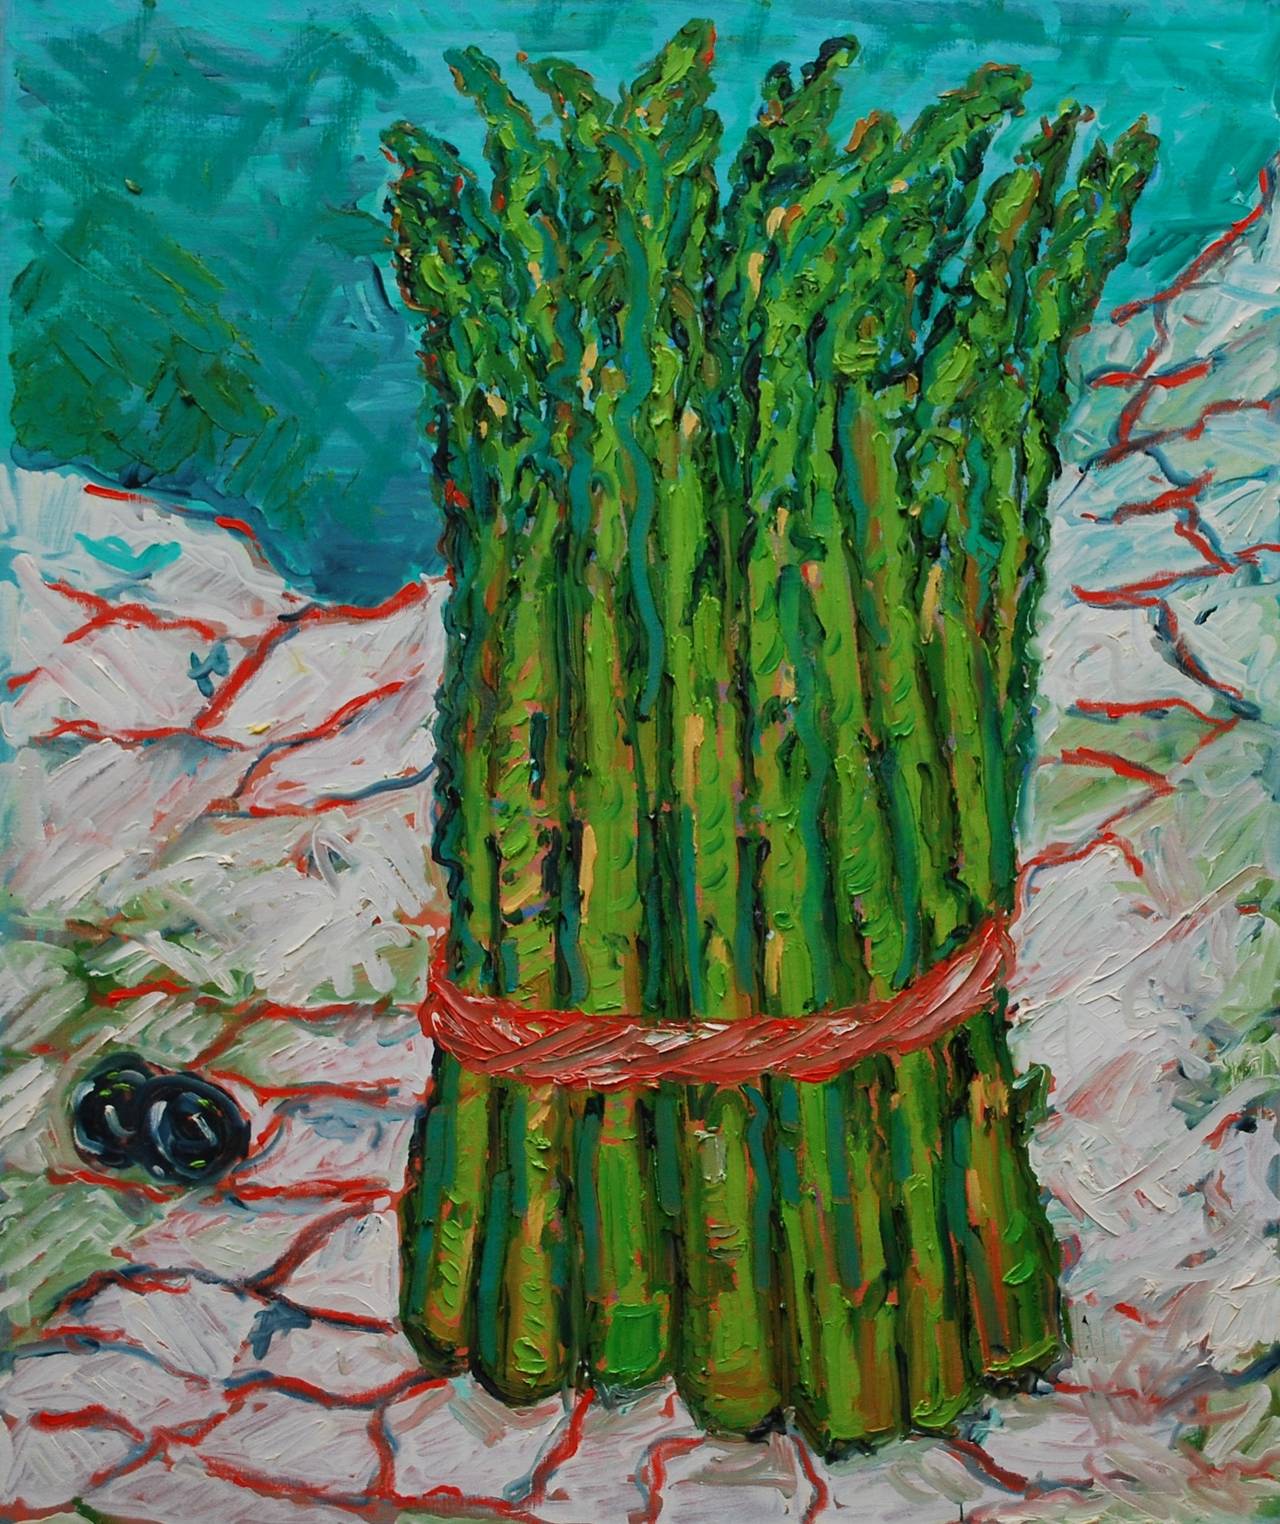 Untitled (Asparagus) - Painting by Judy Rifka